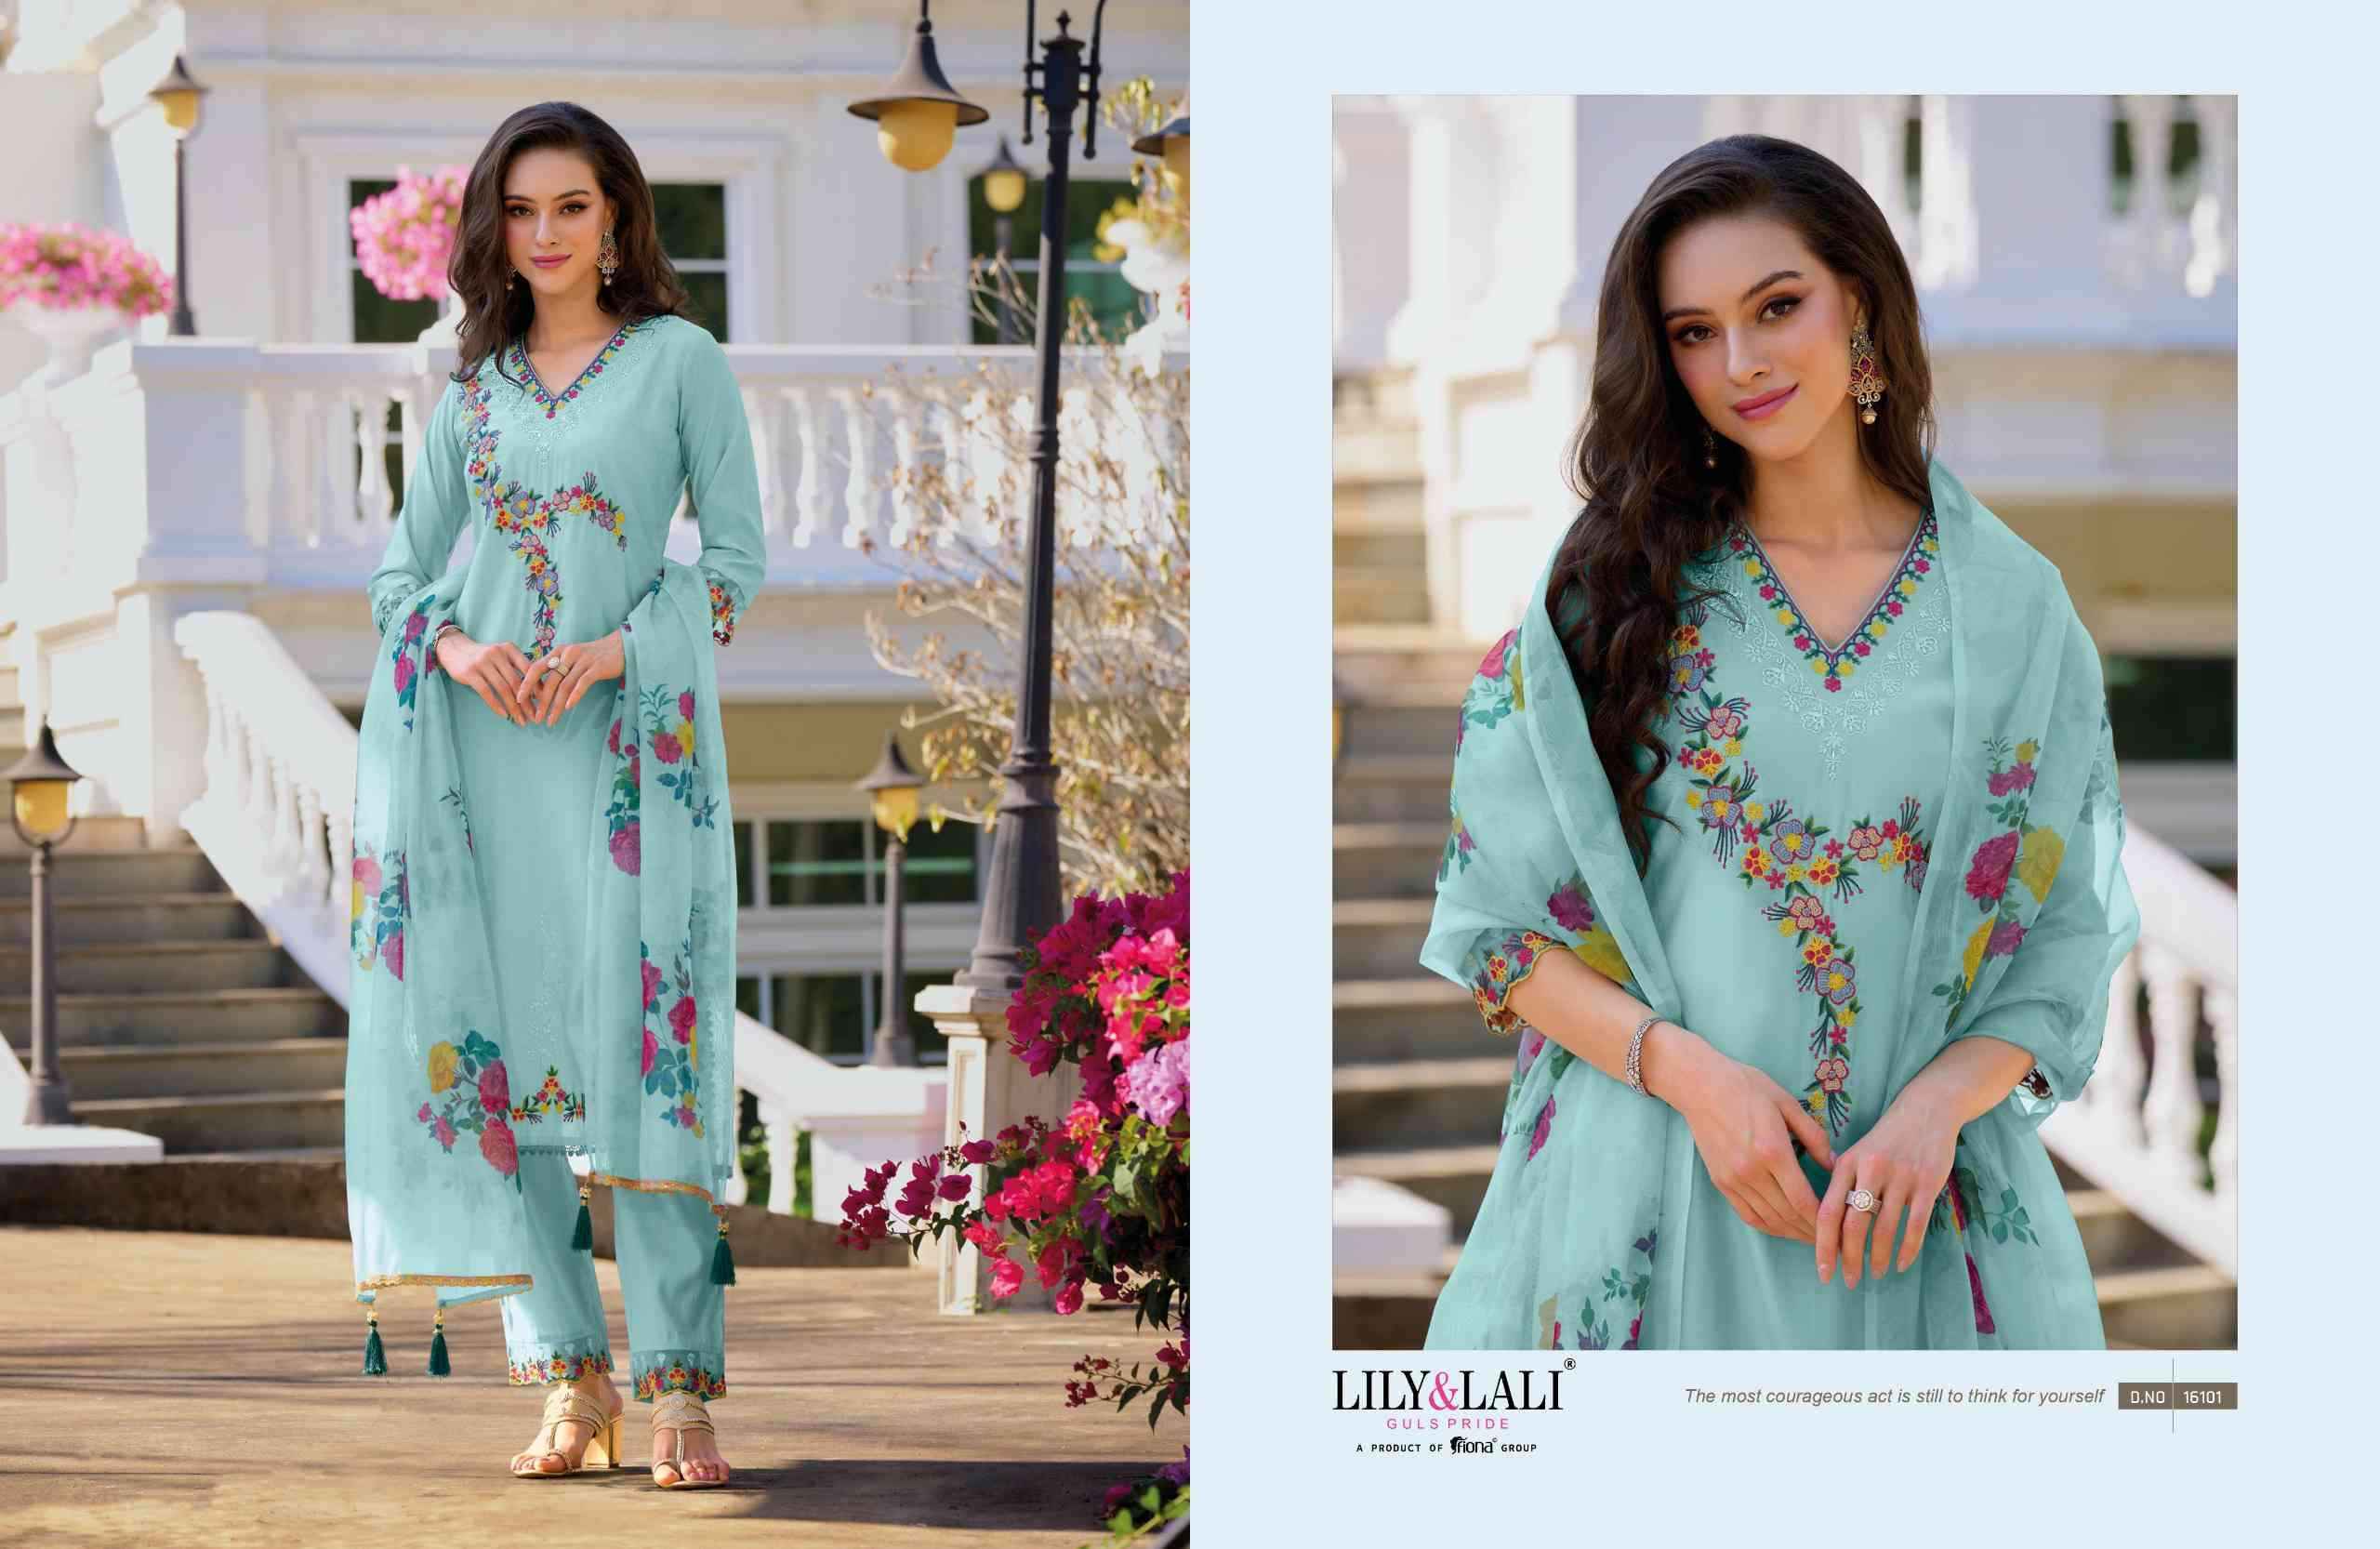 Lily And Lali Navyaa Organza Embroidered Readymade Suit (6 Pc Catalog)